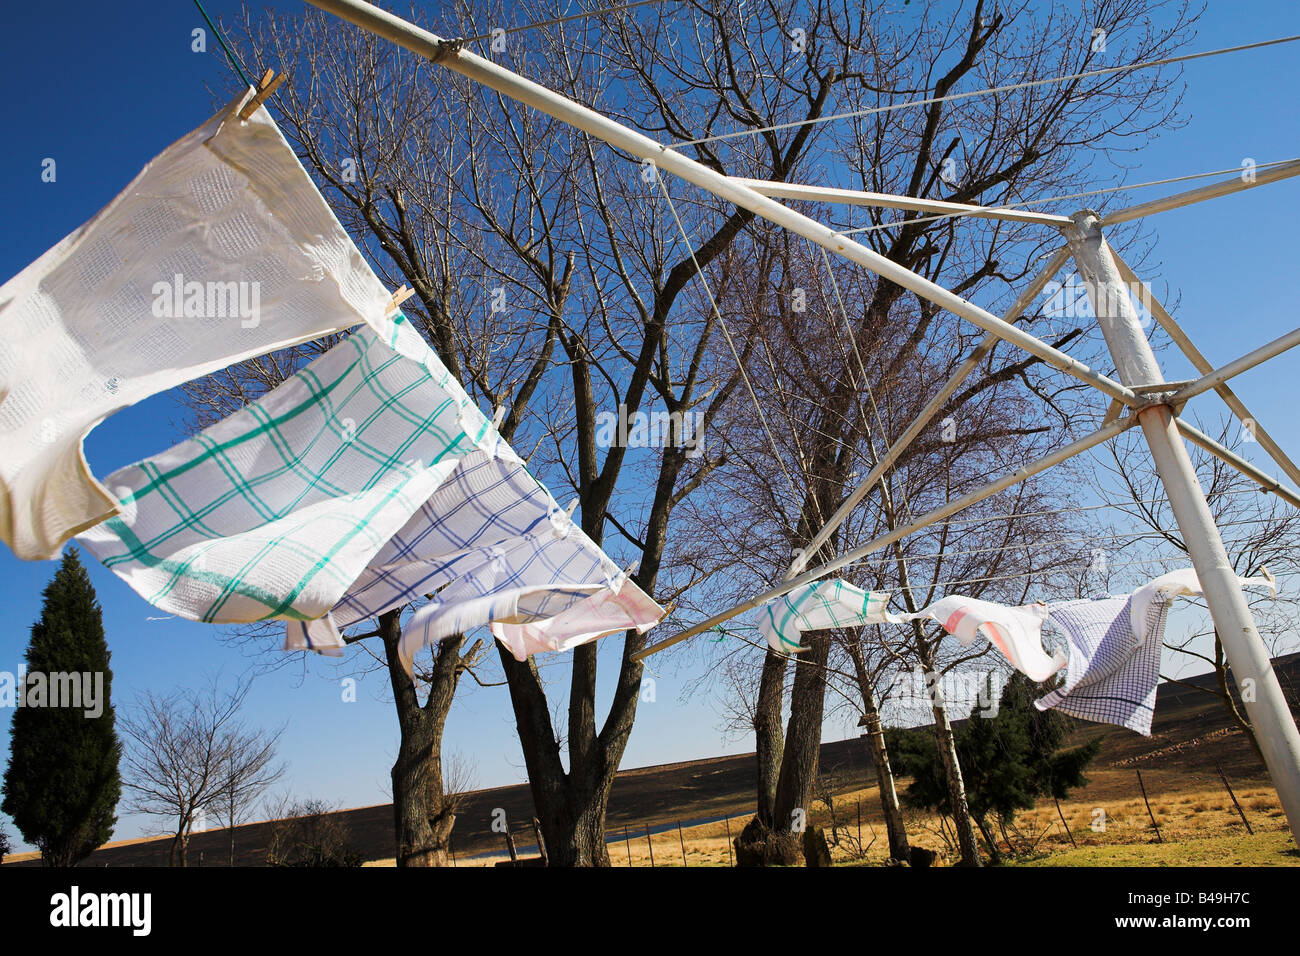 Tea towels on the washing line blowing in the wind Movement on the Towels Stock Photo